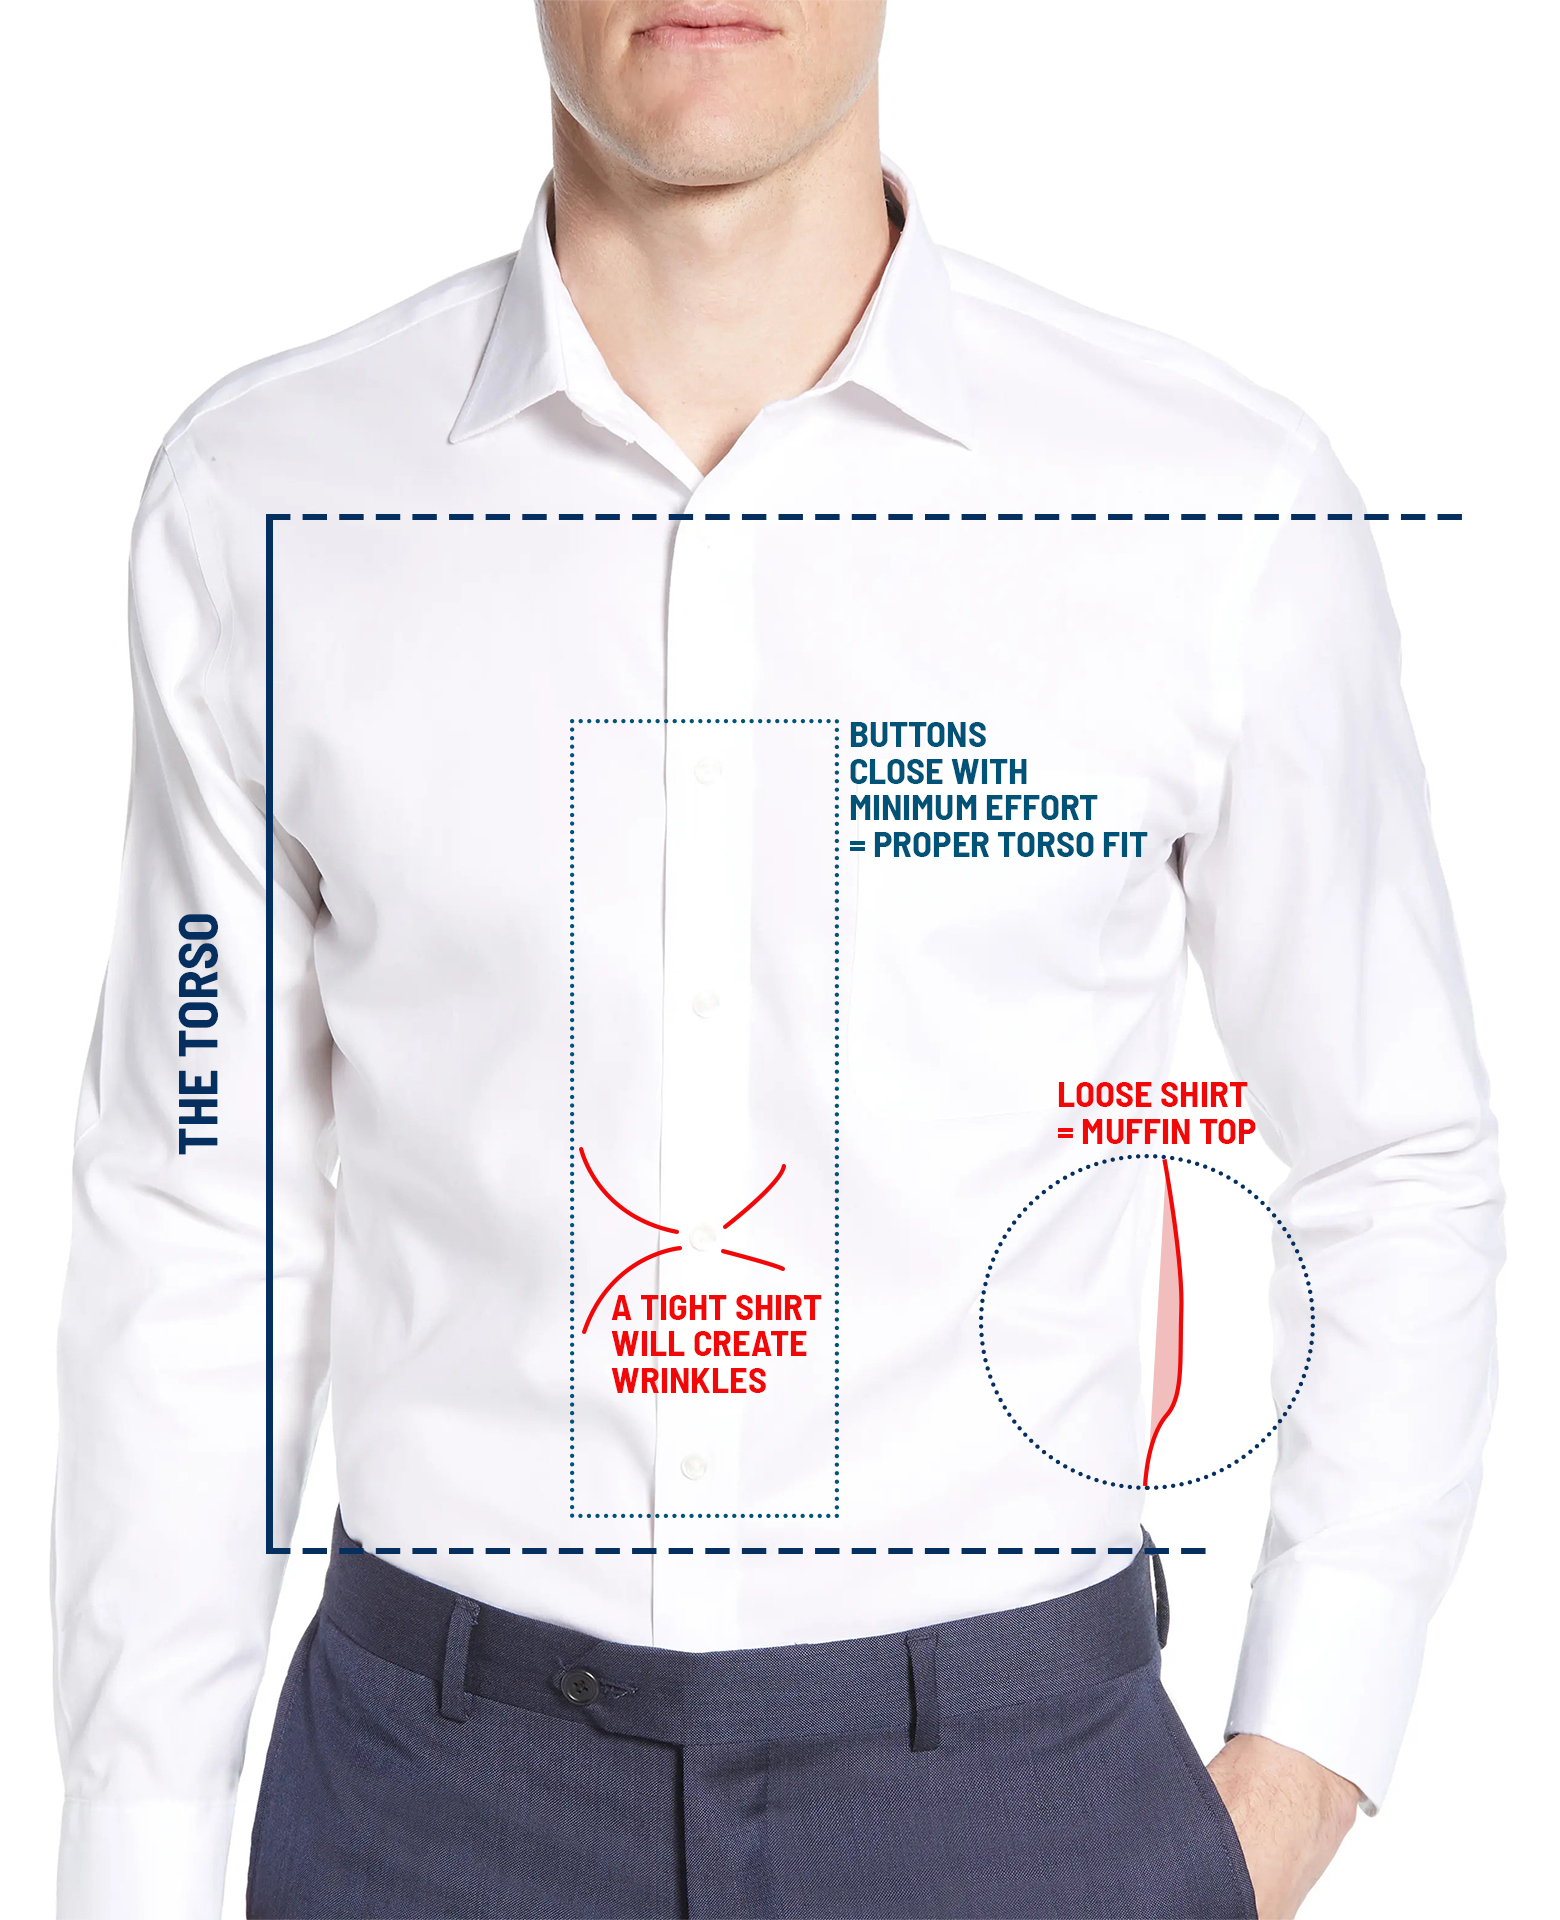 Dress shirt buttons close smoothly for a perfect torso fit